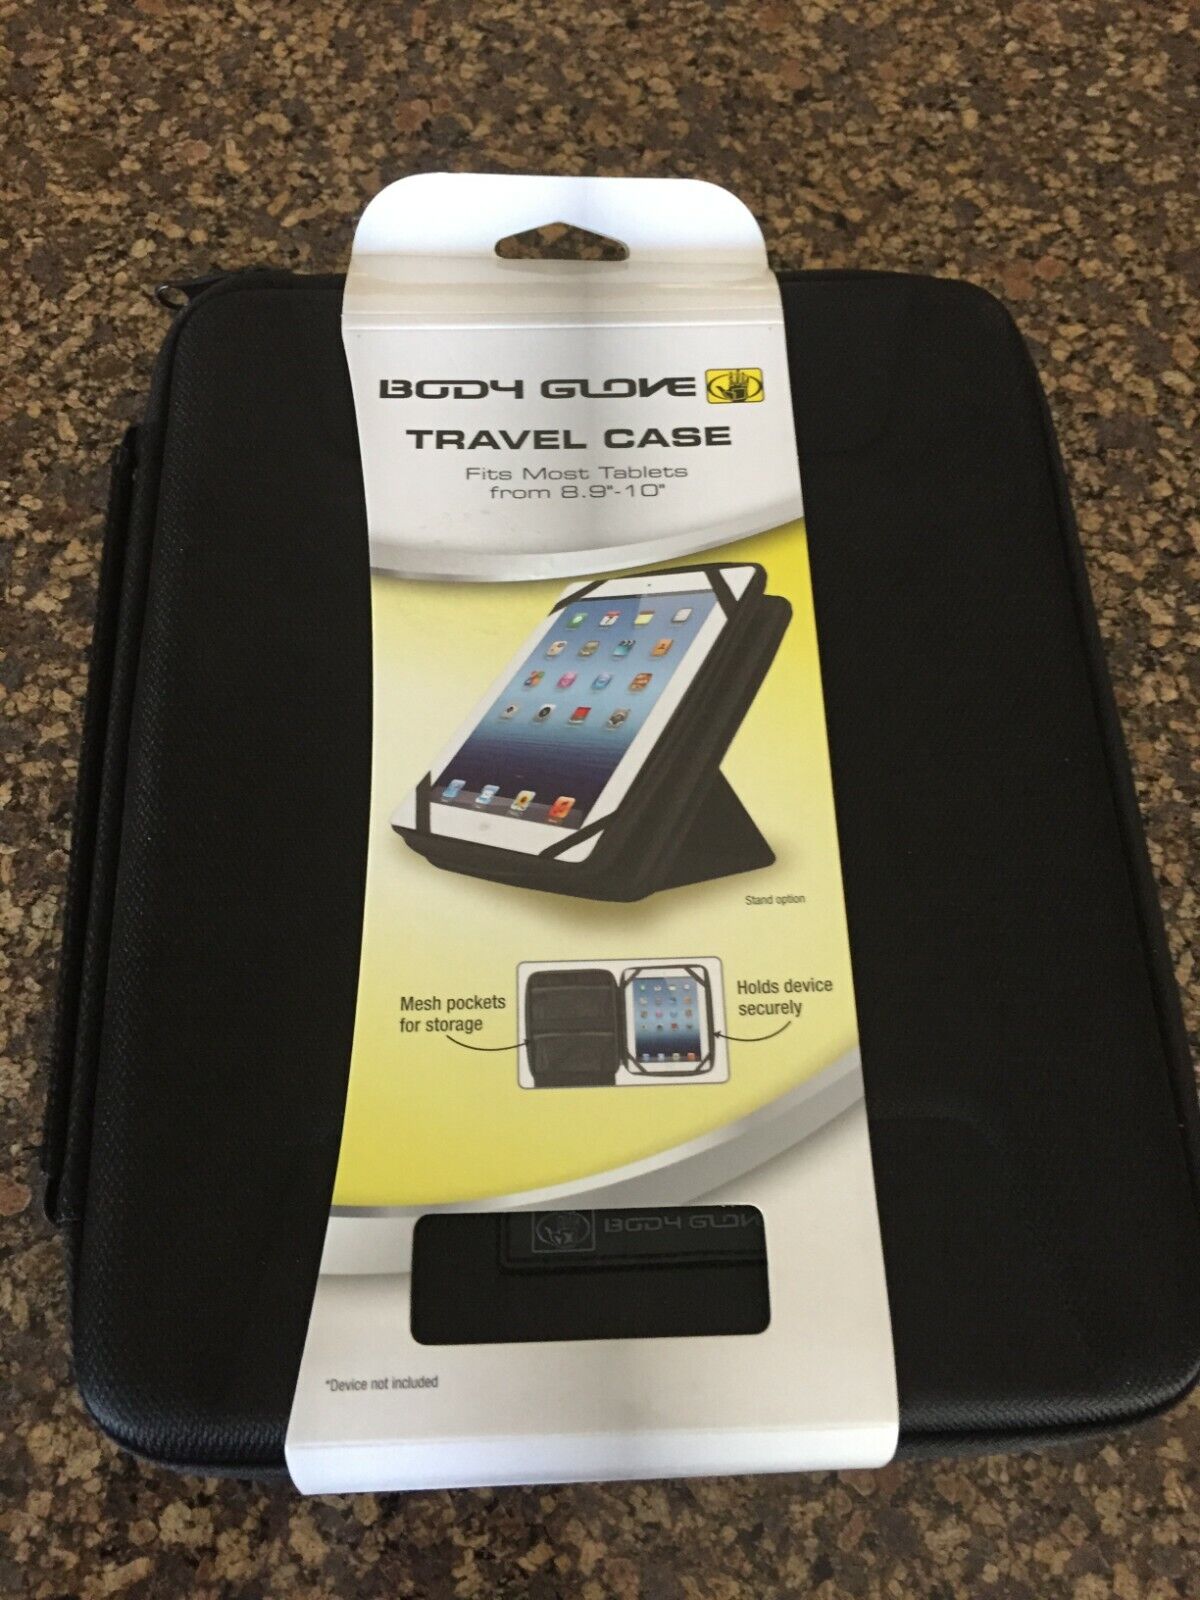 Body Glove Travel Case Fits Most Tablets From 8.9" to 10" Brand NEW